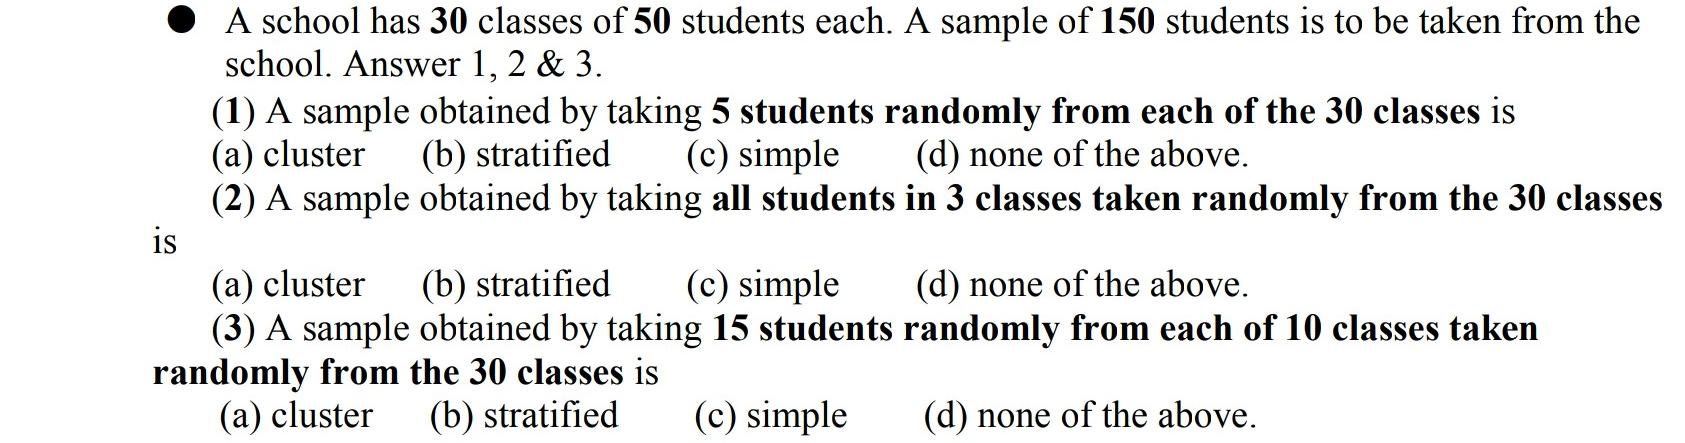 A School Has 30 Classes Of 50 Students Each A Sample Of 150 Students Is To Be Taken From The School Answer 1 2 3 1